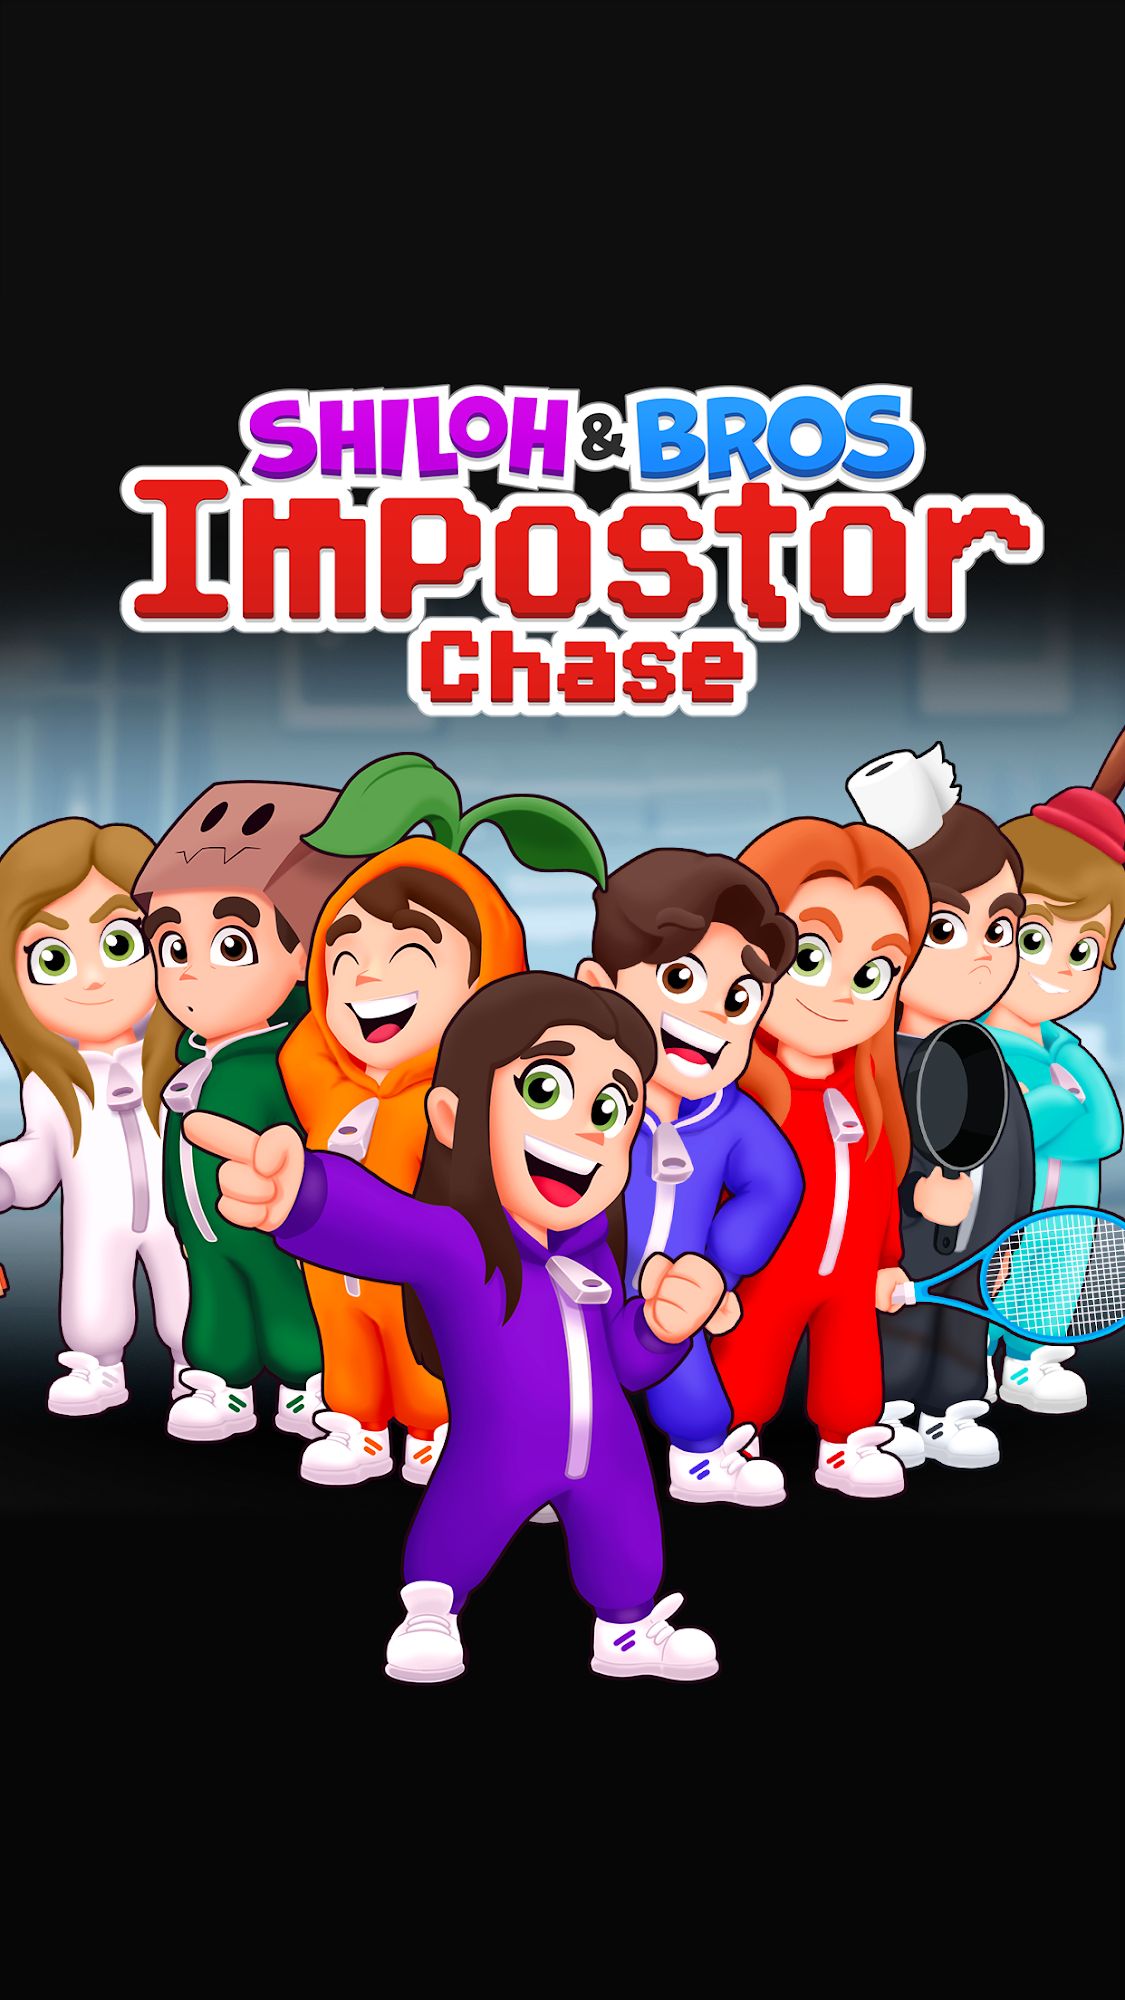 Shiloh & Bros Impostor Chase for Android